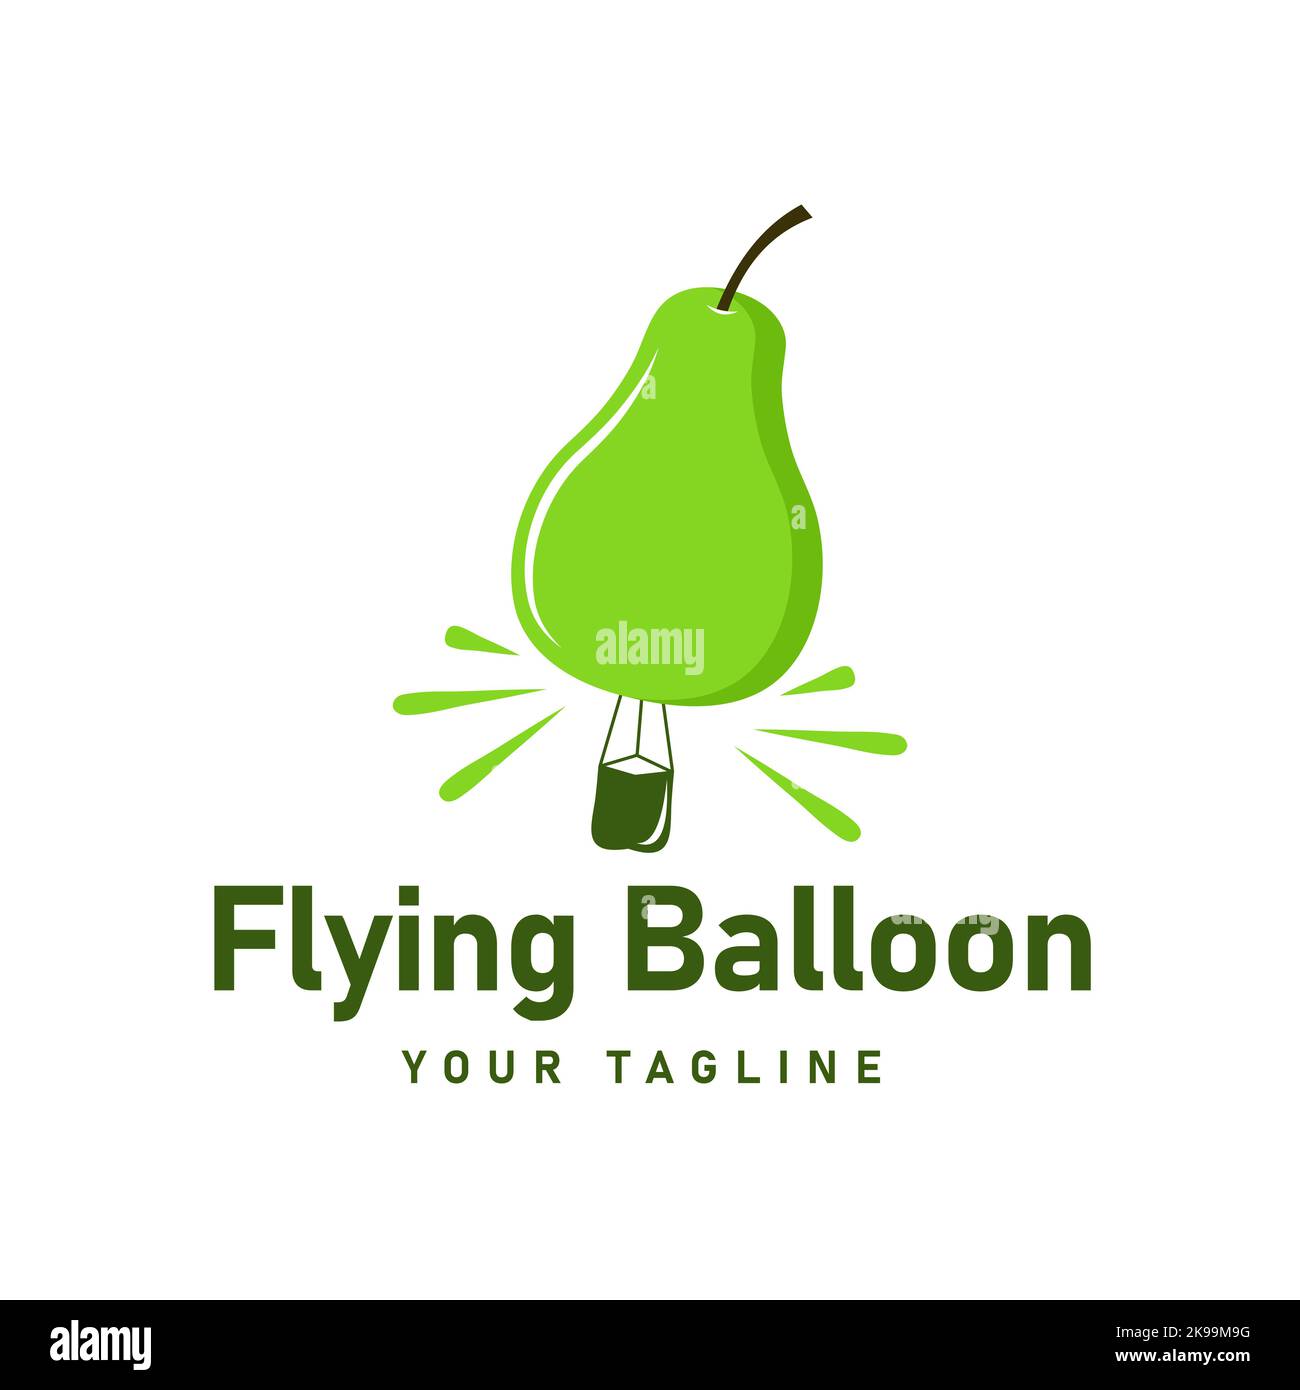 Unique green pear shaped balloon flying in the air illustration logo, vector hot air balloon Stock Vector